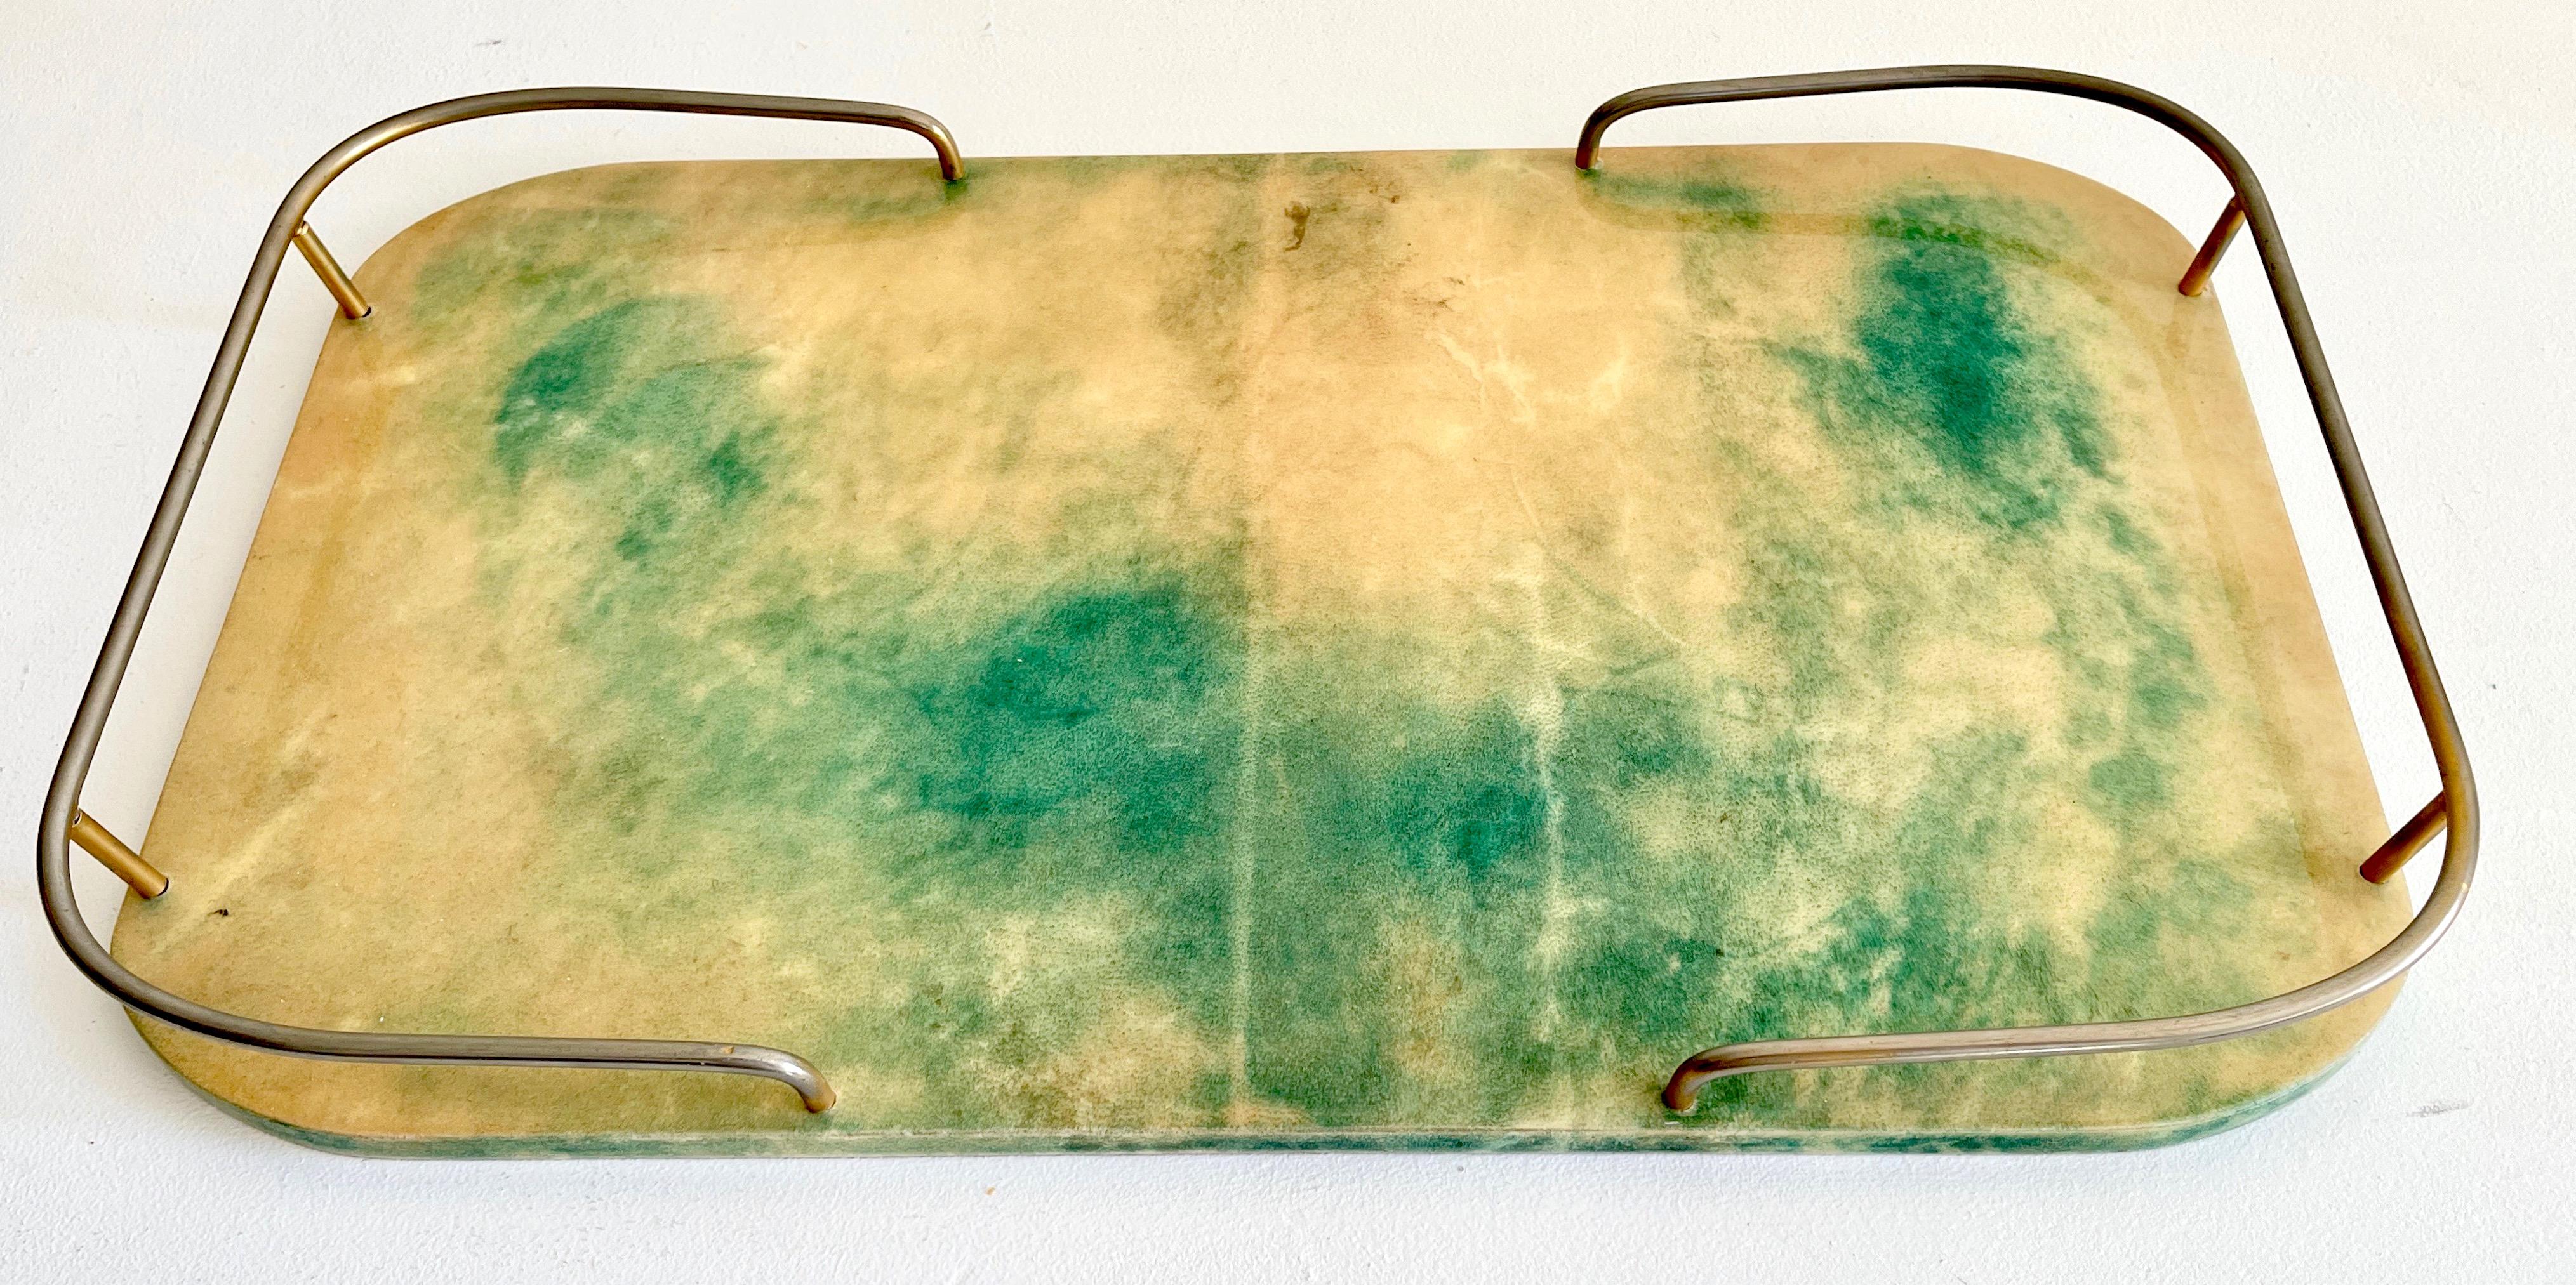 Cocktail Tray created by Italian Designer, Aldo Tura,  1960's. Lacquered goat skin over mahogany with metal railings. Durable finish. Top quality materials and craftsmanship. 
12